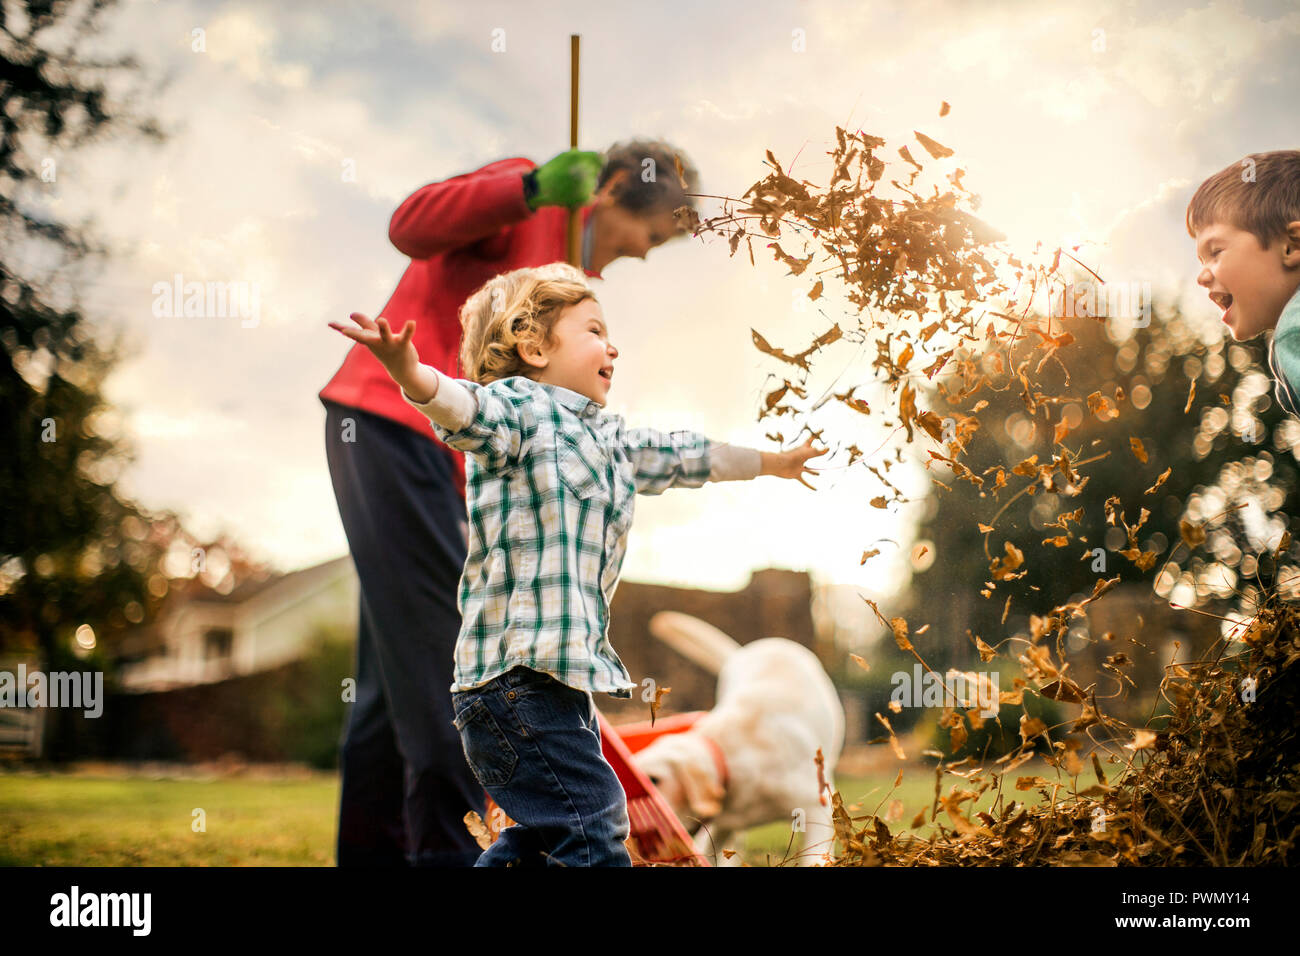 Grandmother raking leaves with grandsons. Stock Photo